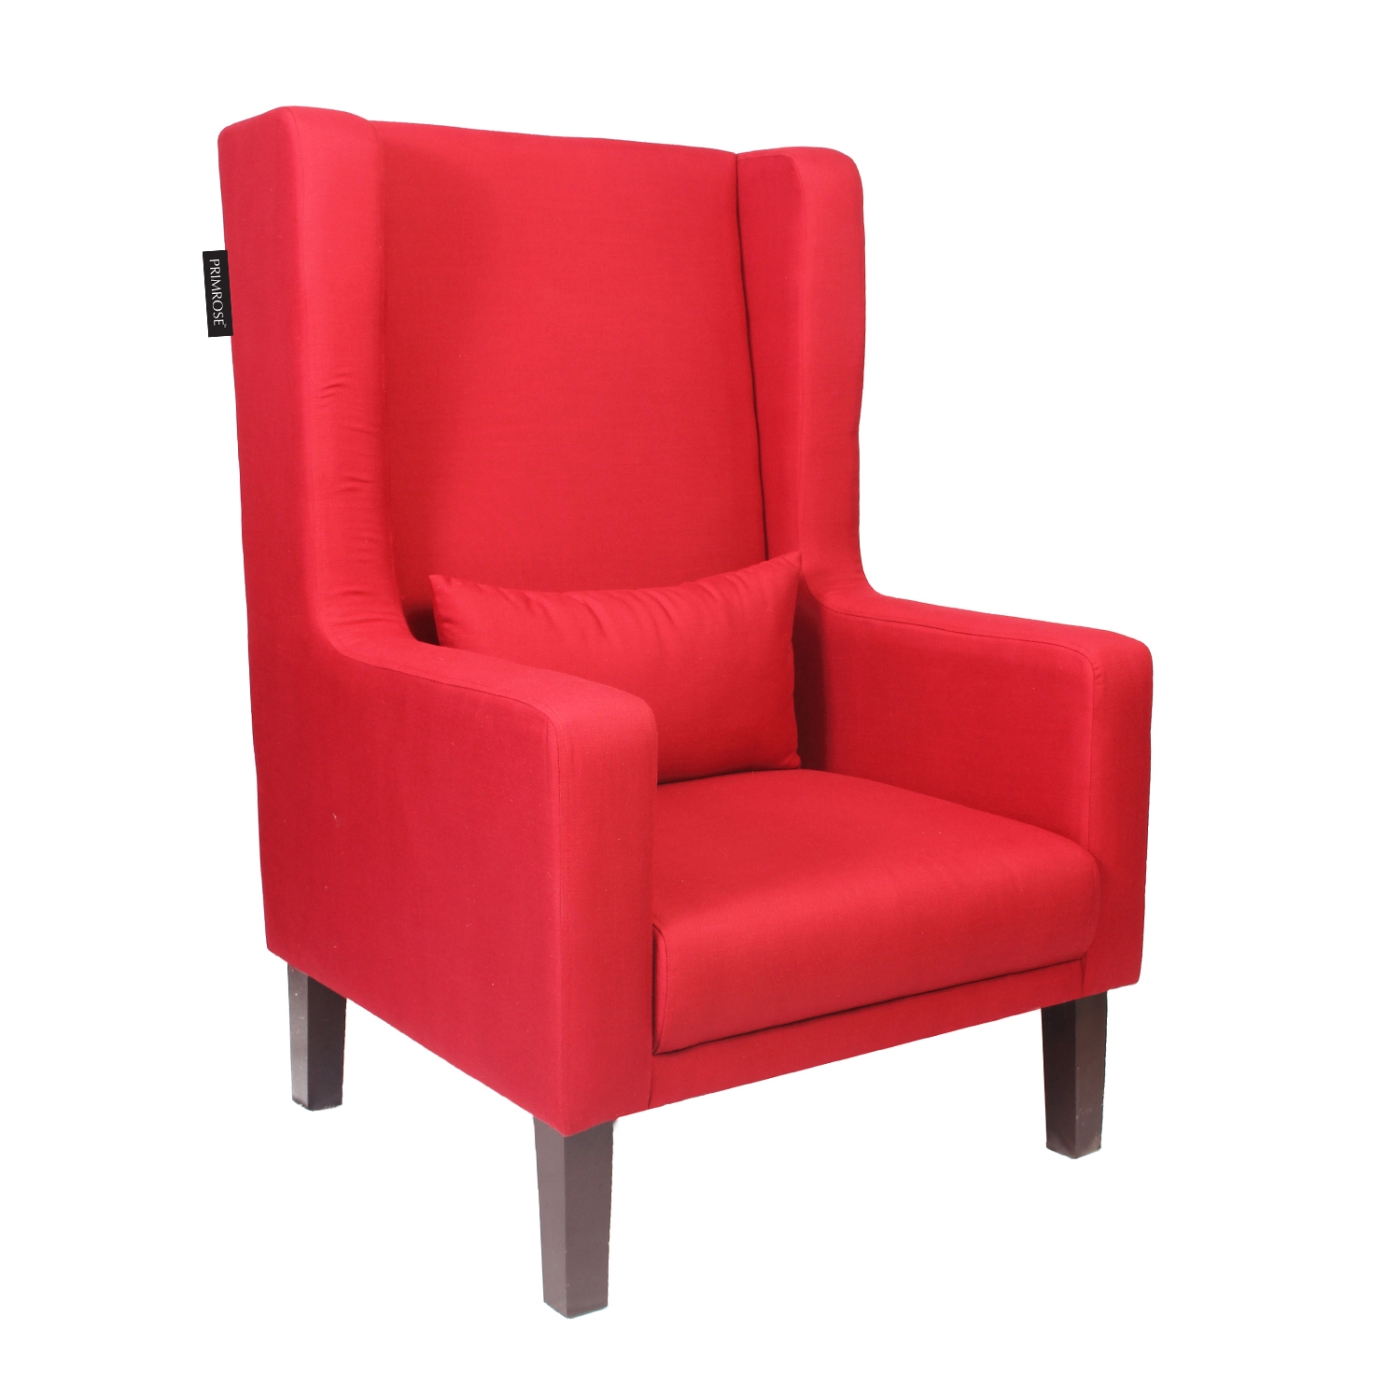 PRIMROSE Chicago High Back Faux Lenin Fabric Chair - Red  